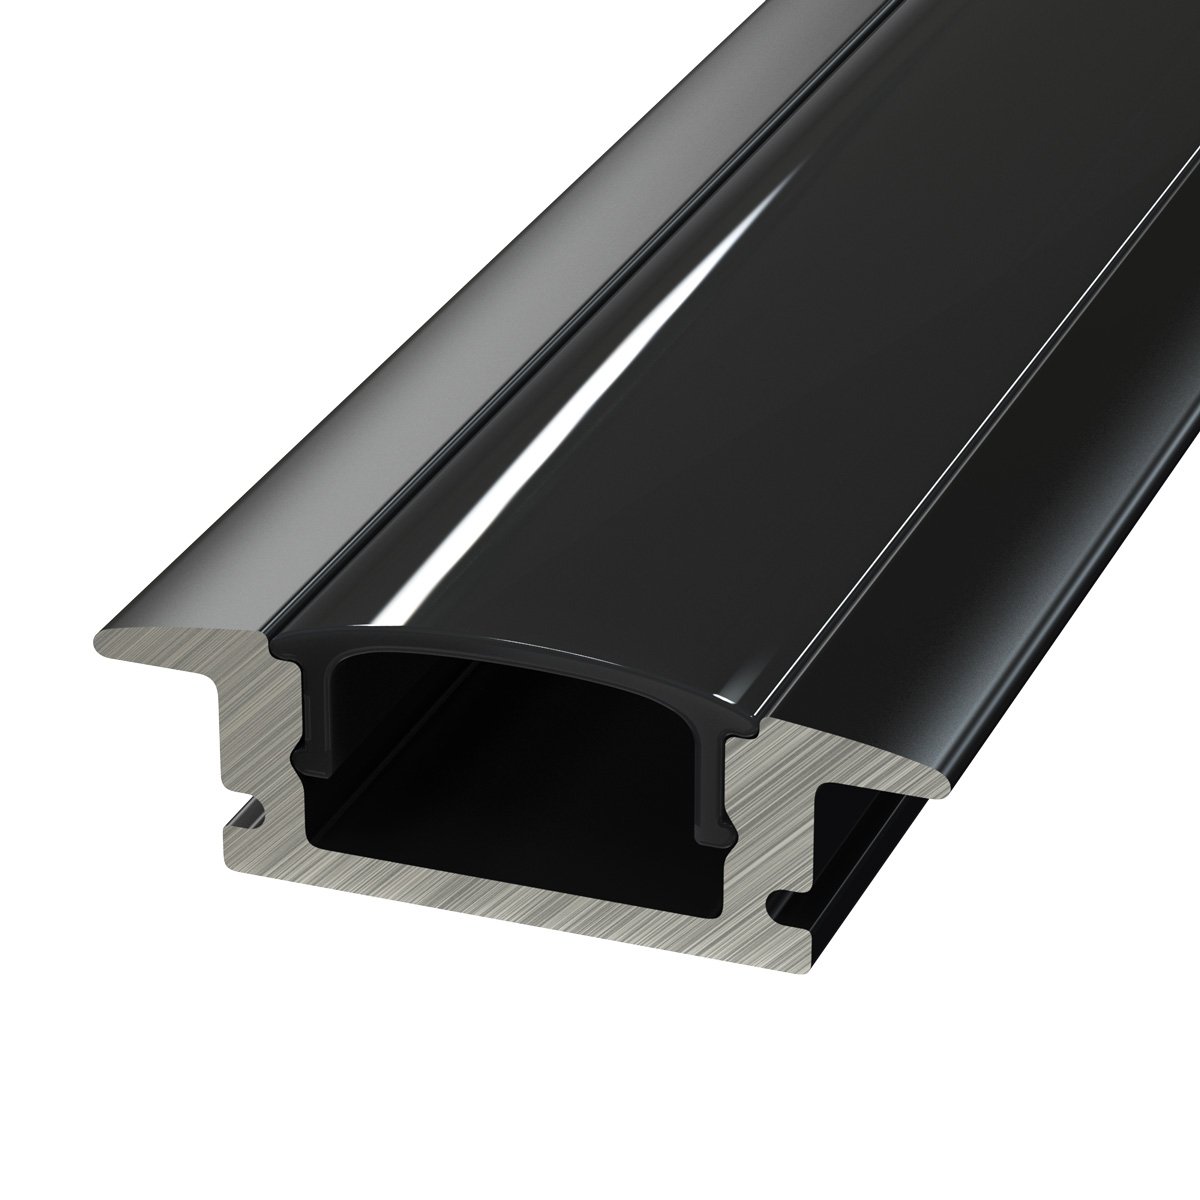 View 2m Black Aluminium Profile Recessed With Cover and End Caps information